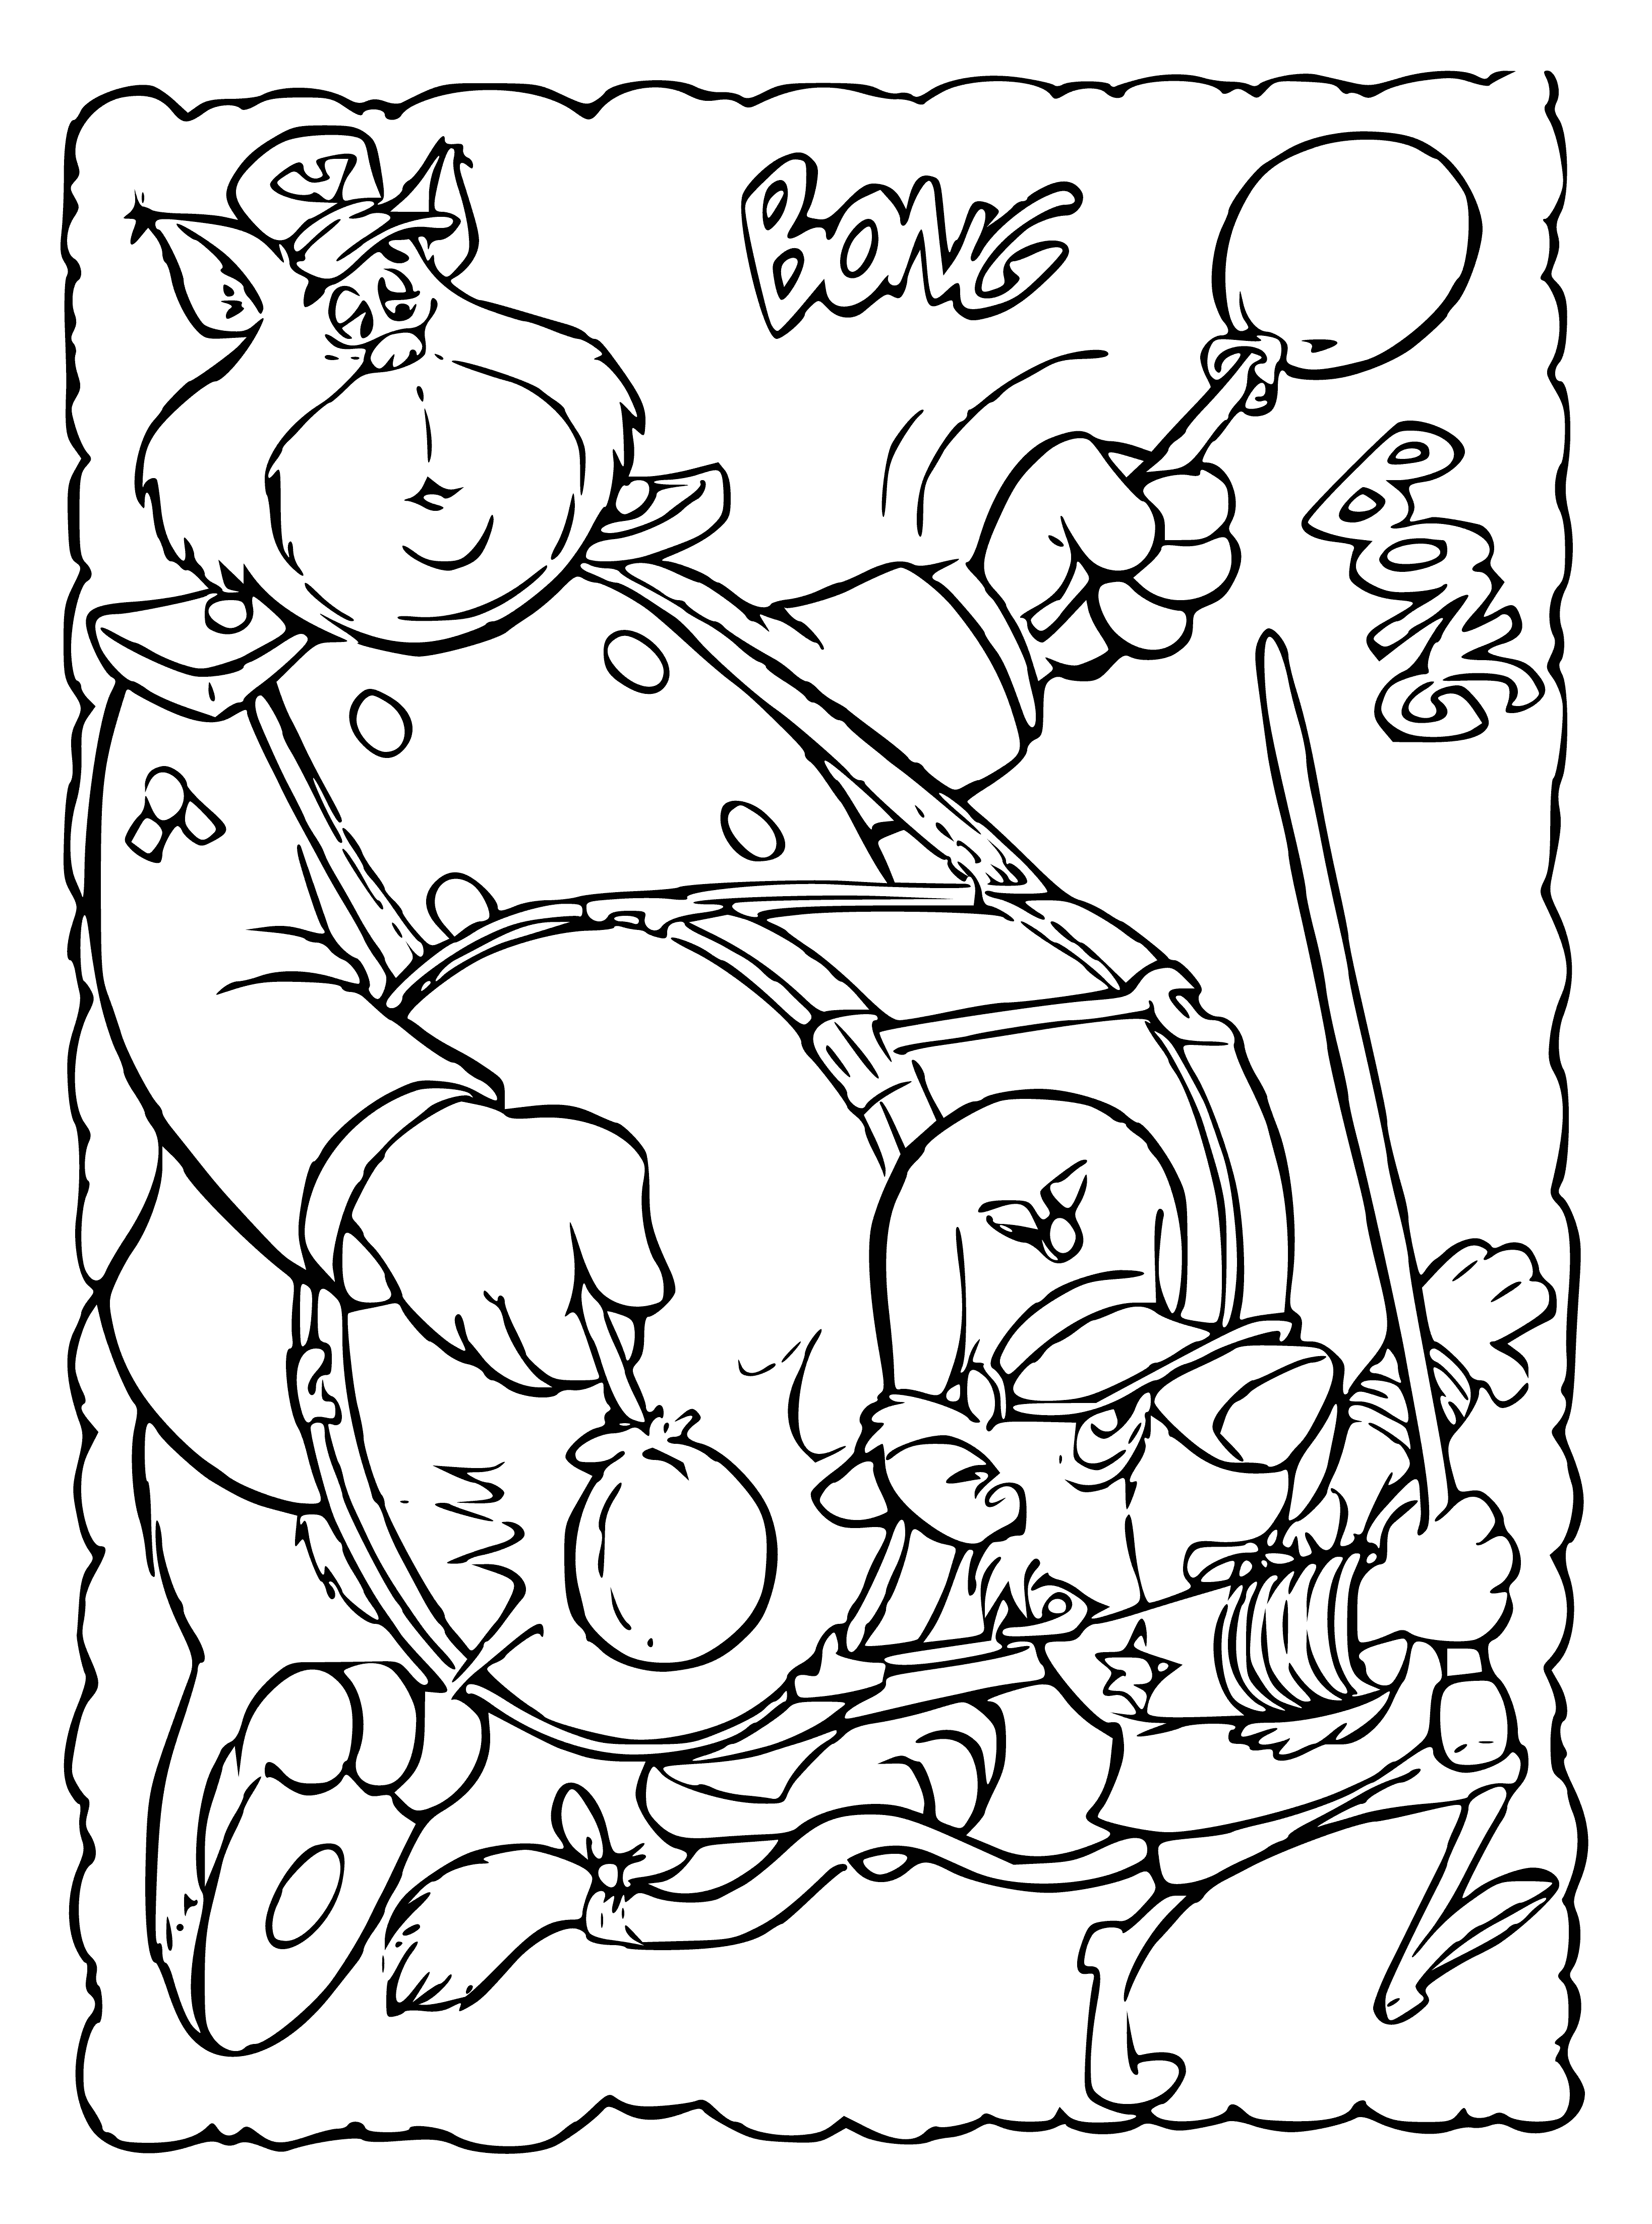 coloring page: Guard in red coat and black hat stands at parade's edge with flag and drum, looking on.